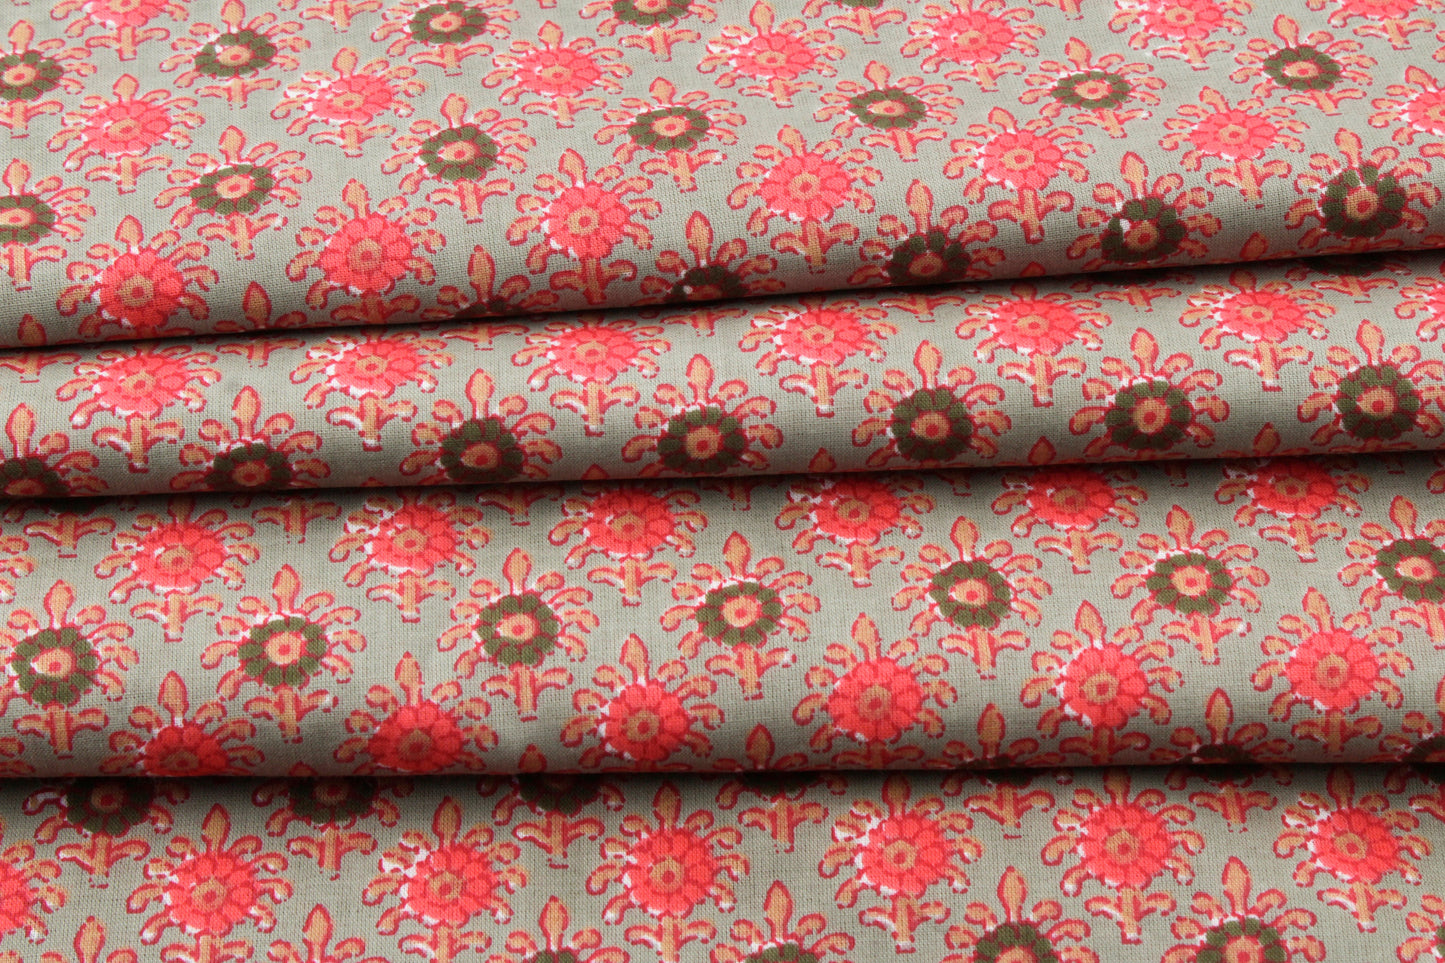 Green Screen Print Floral Cotton Fabric